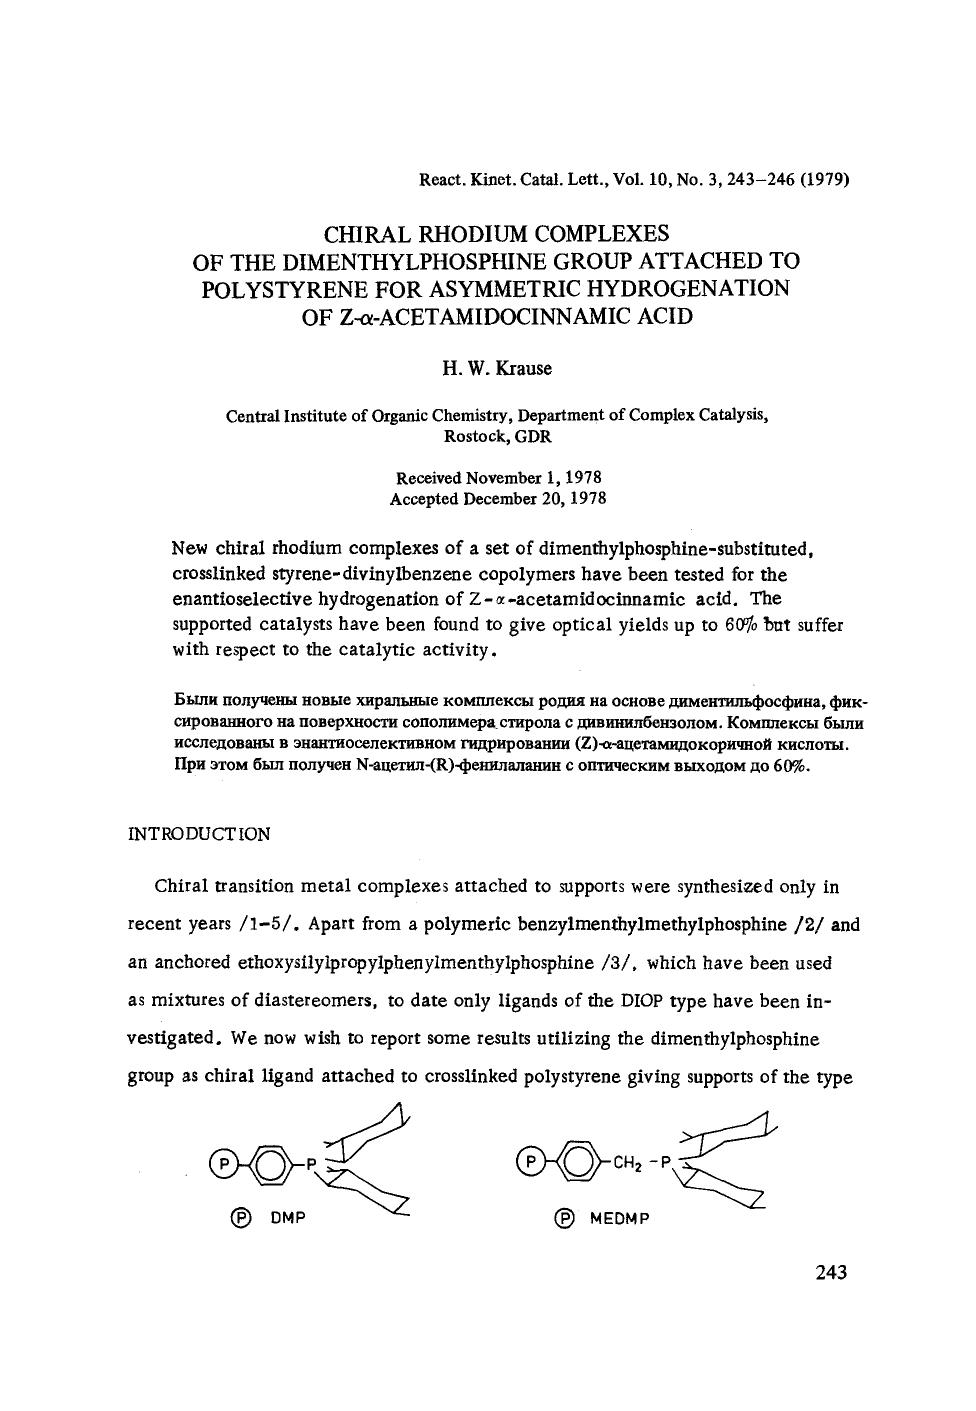 Chiral rhodium complexes of the dimenthylphosphine group attached to polystyrene for asymmetric hydrogenation of Z-&#x03B1;-acetamidocinnamic acid by Unknown